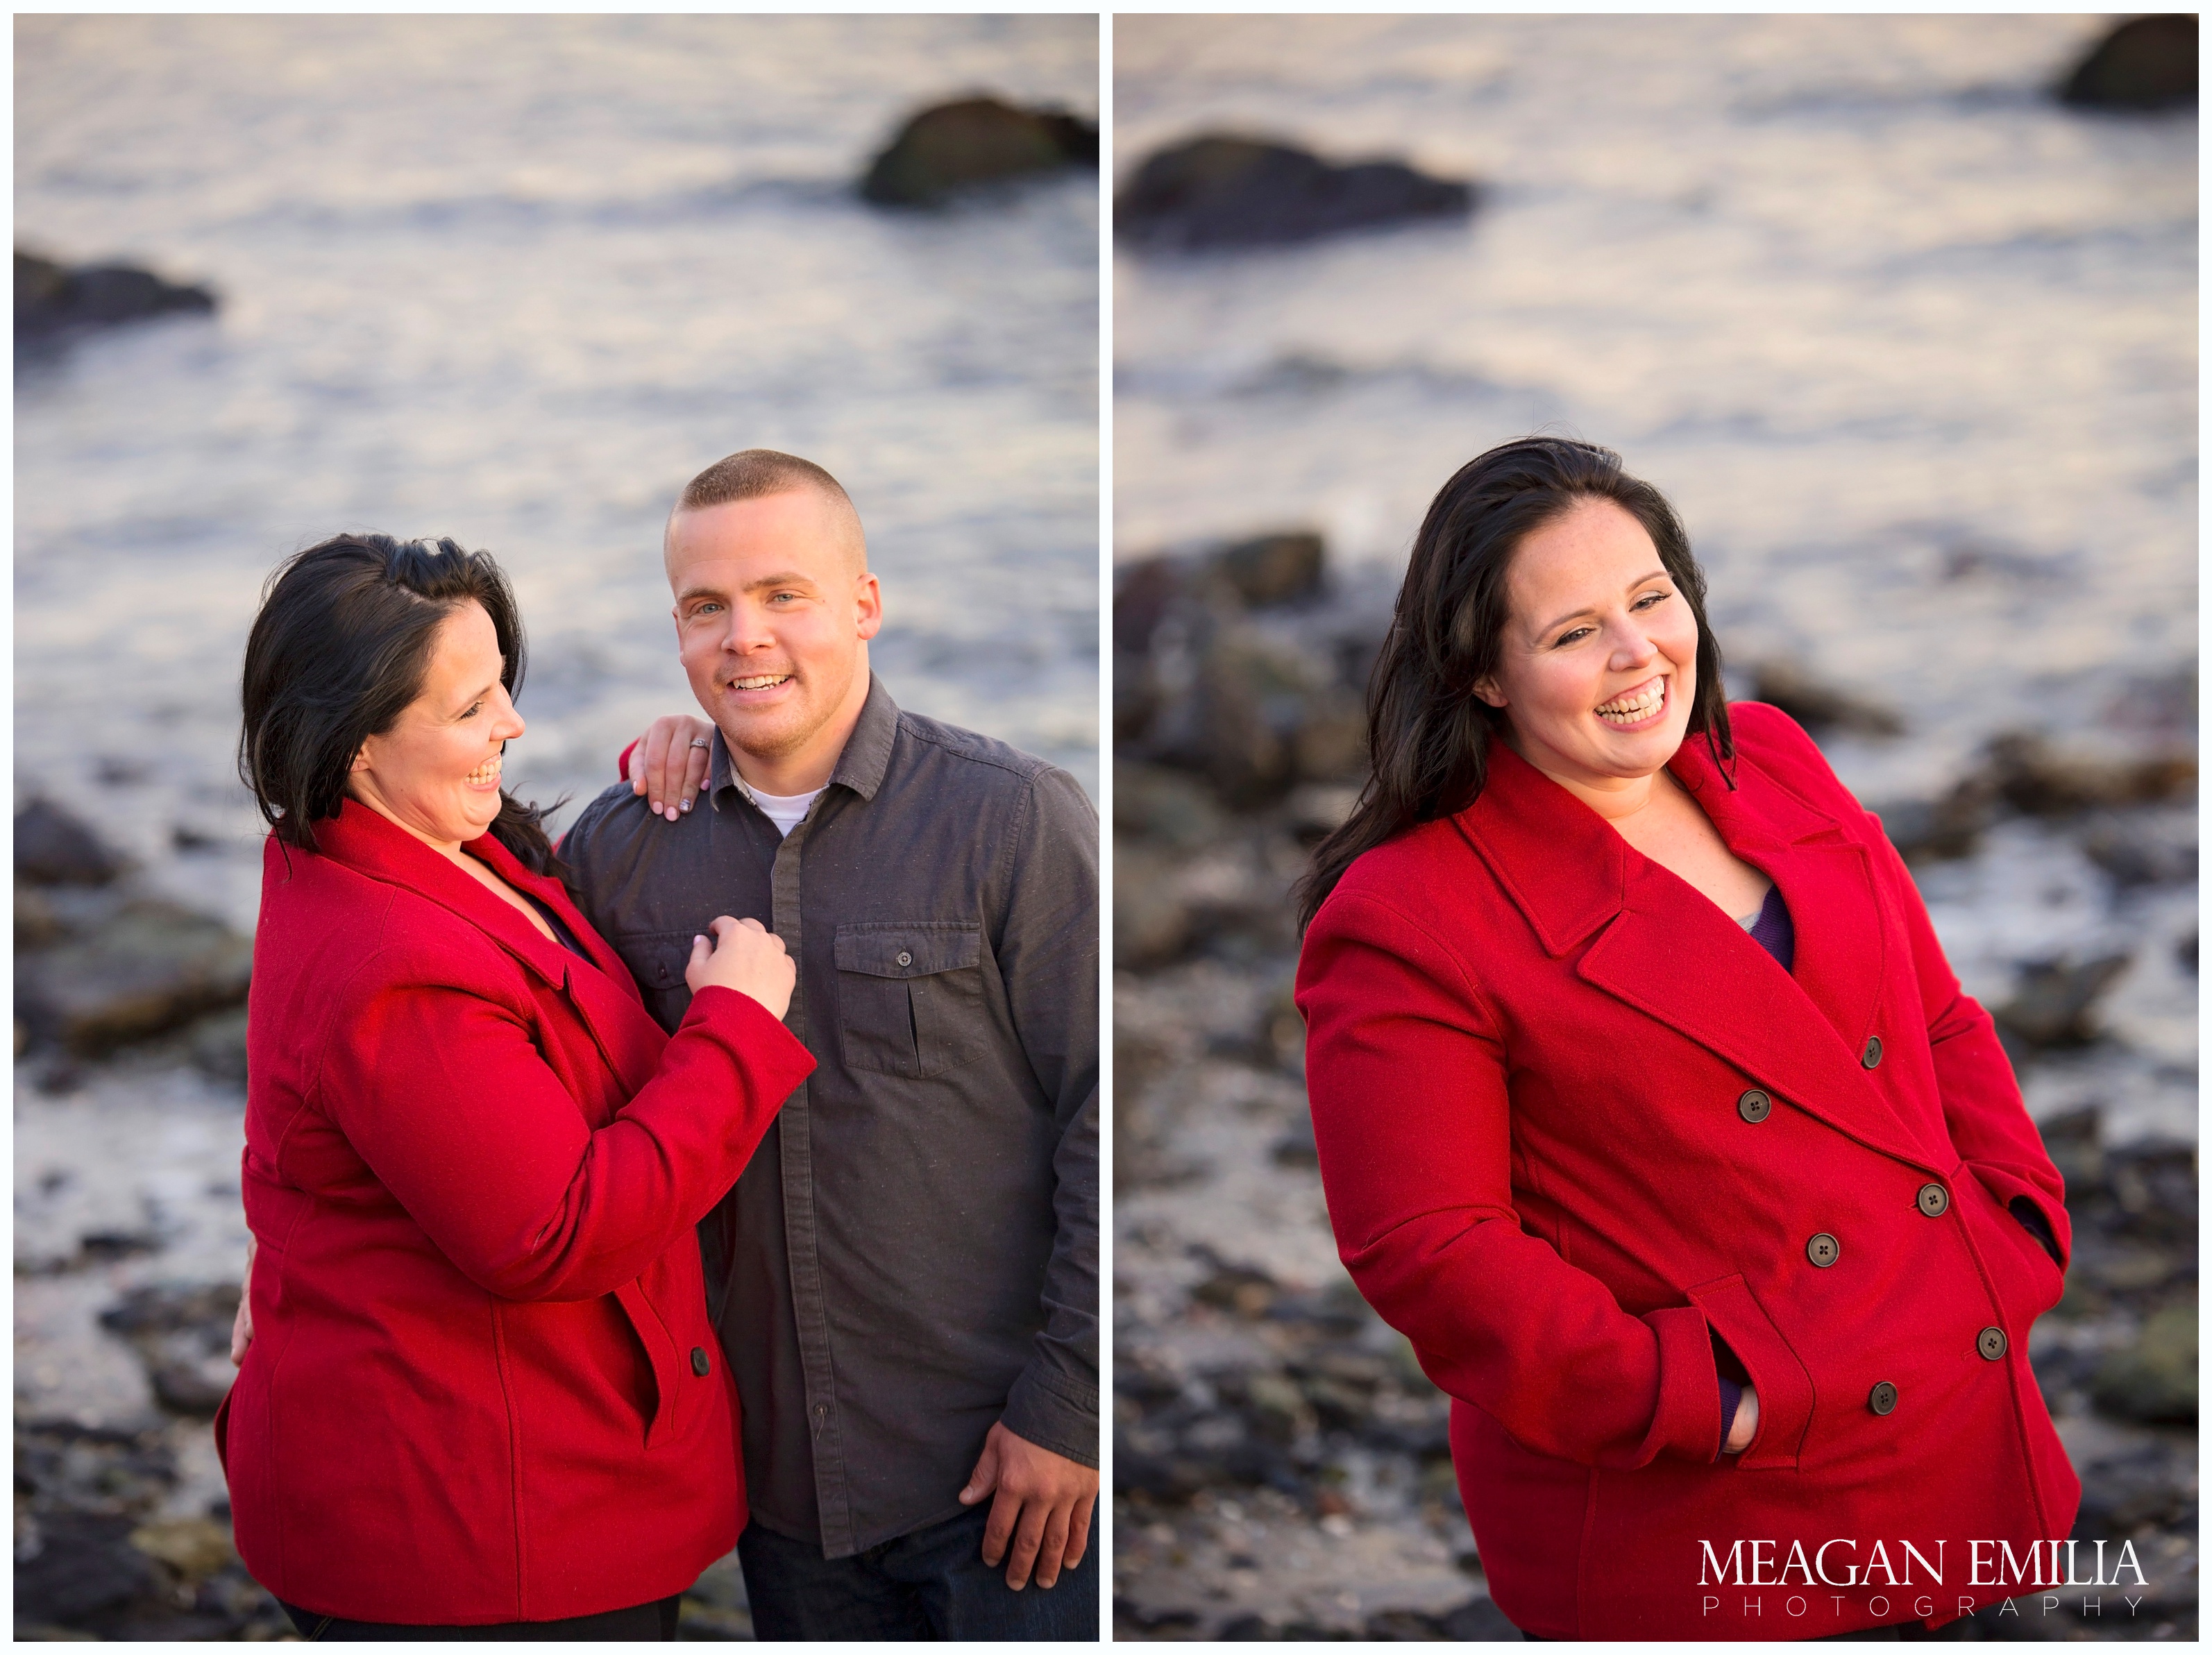 Danielle & Greg engagement photos at Rocky Point State Park in Warwick, RI.